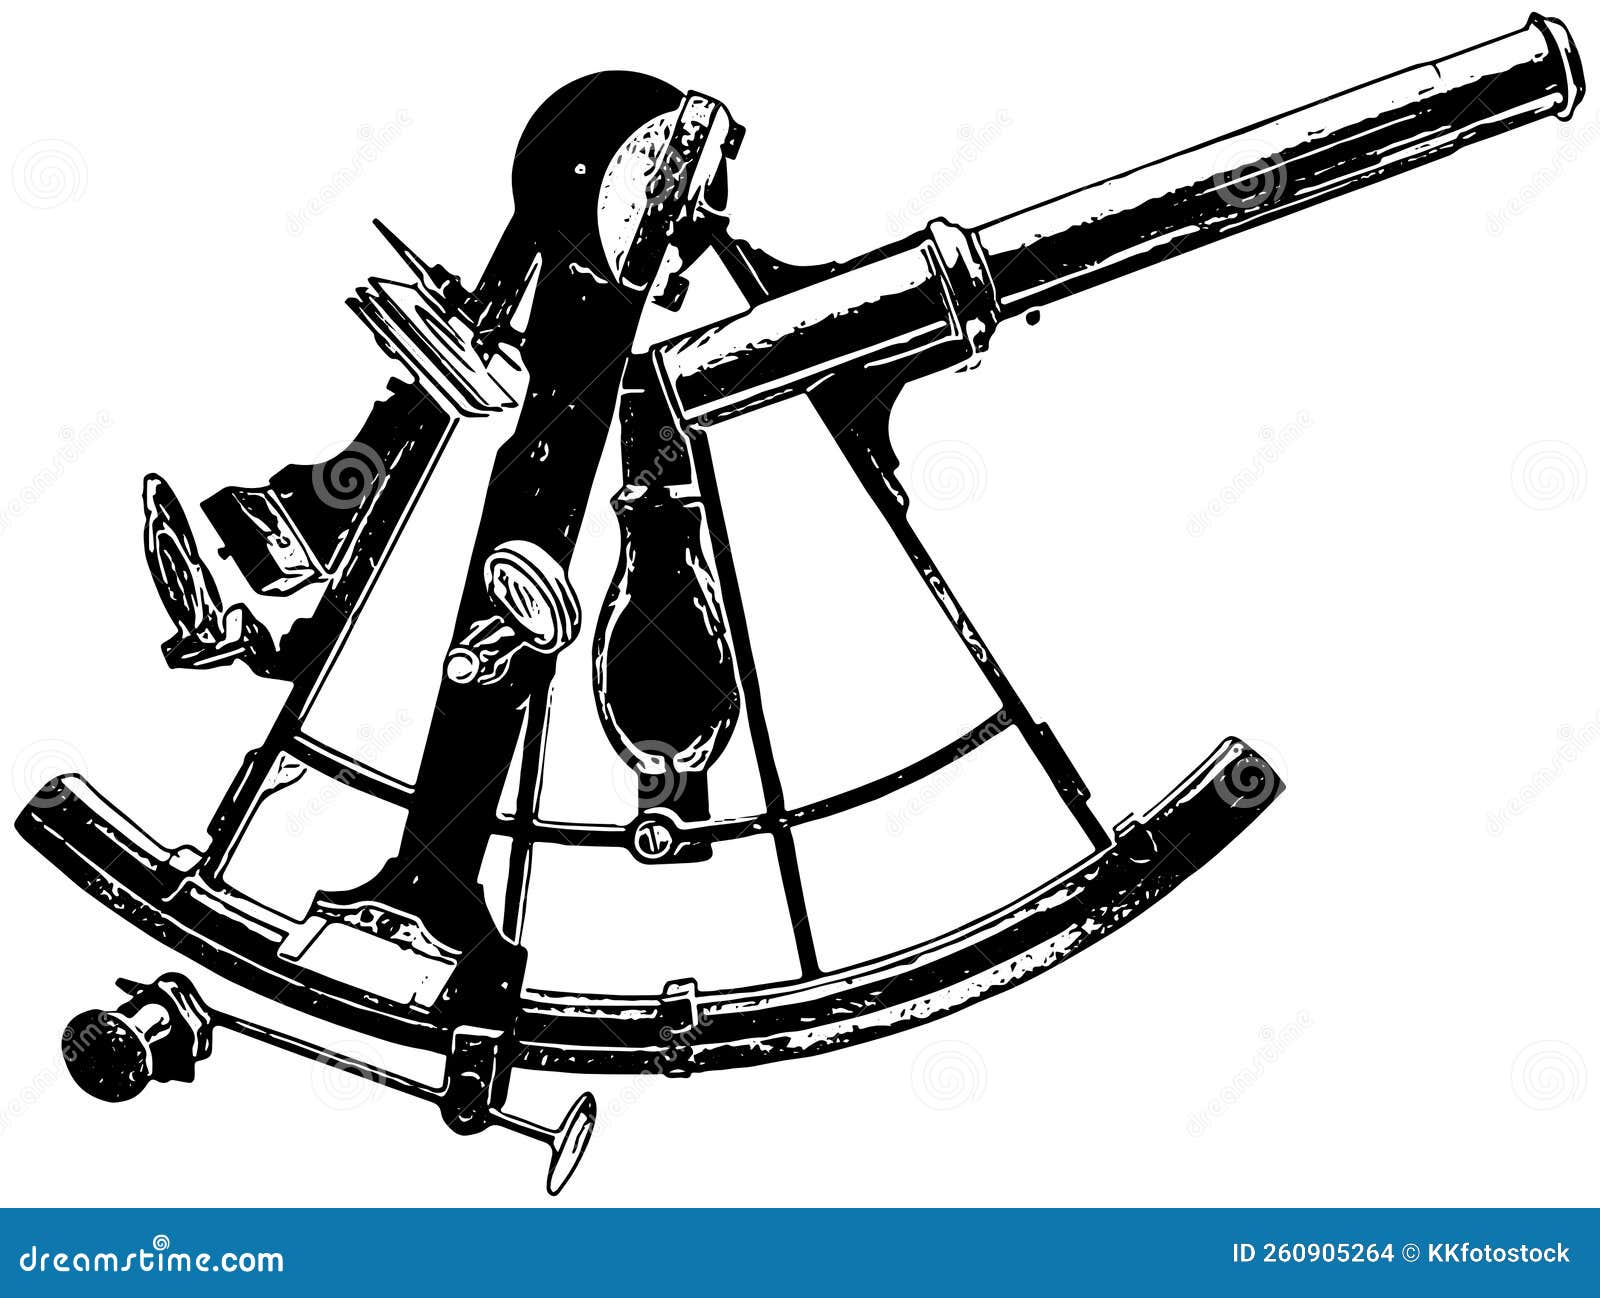 Photograph | Tycho Brahe, Triangular Sextant, 1582 | Science Source Images